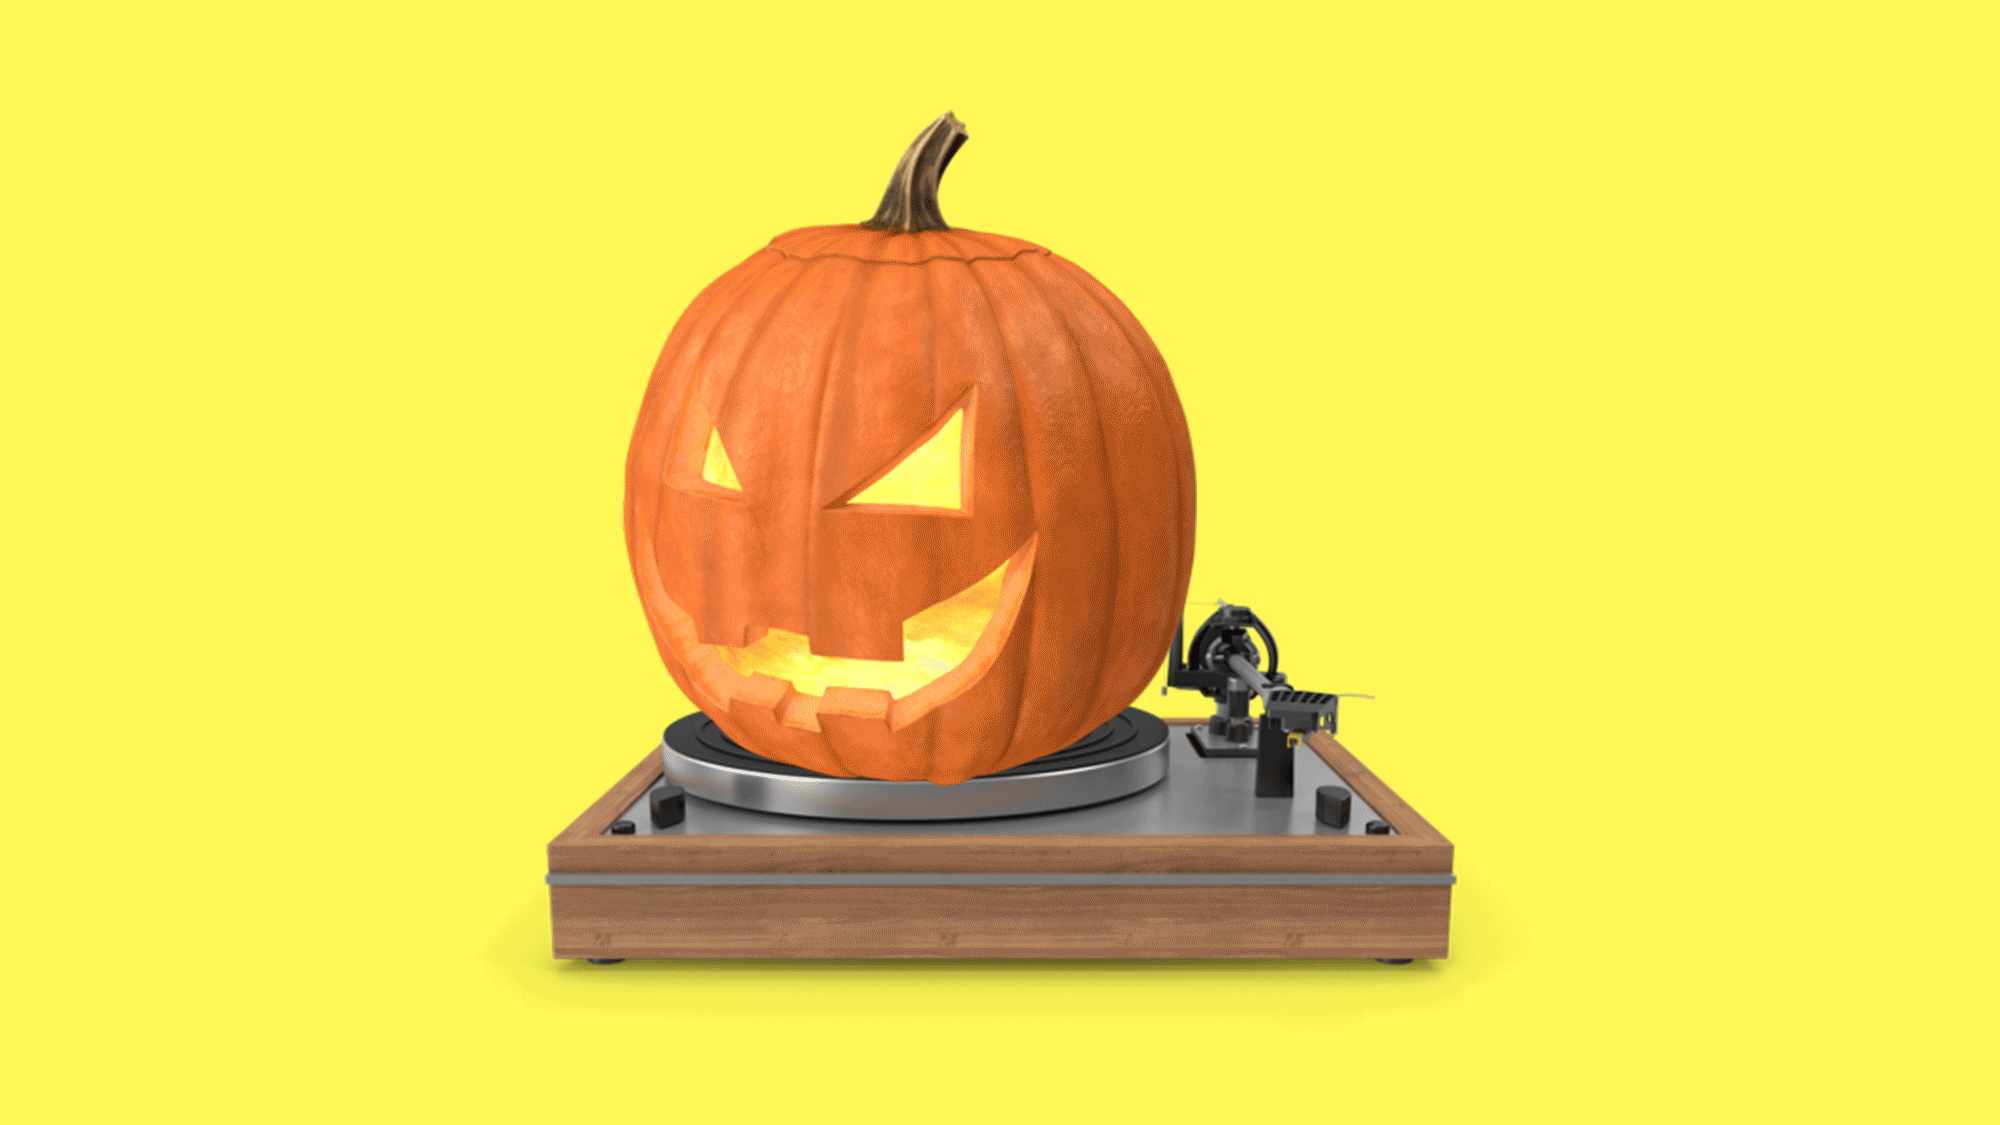 What songs make you think of Halloween?